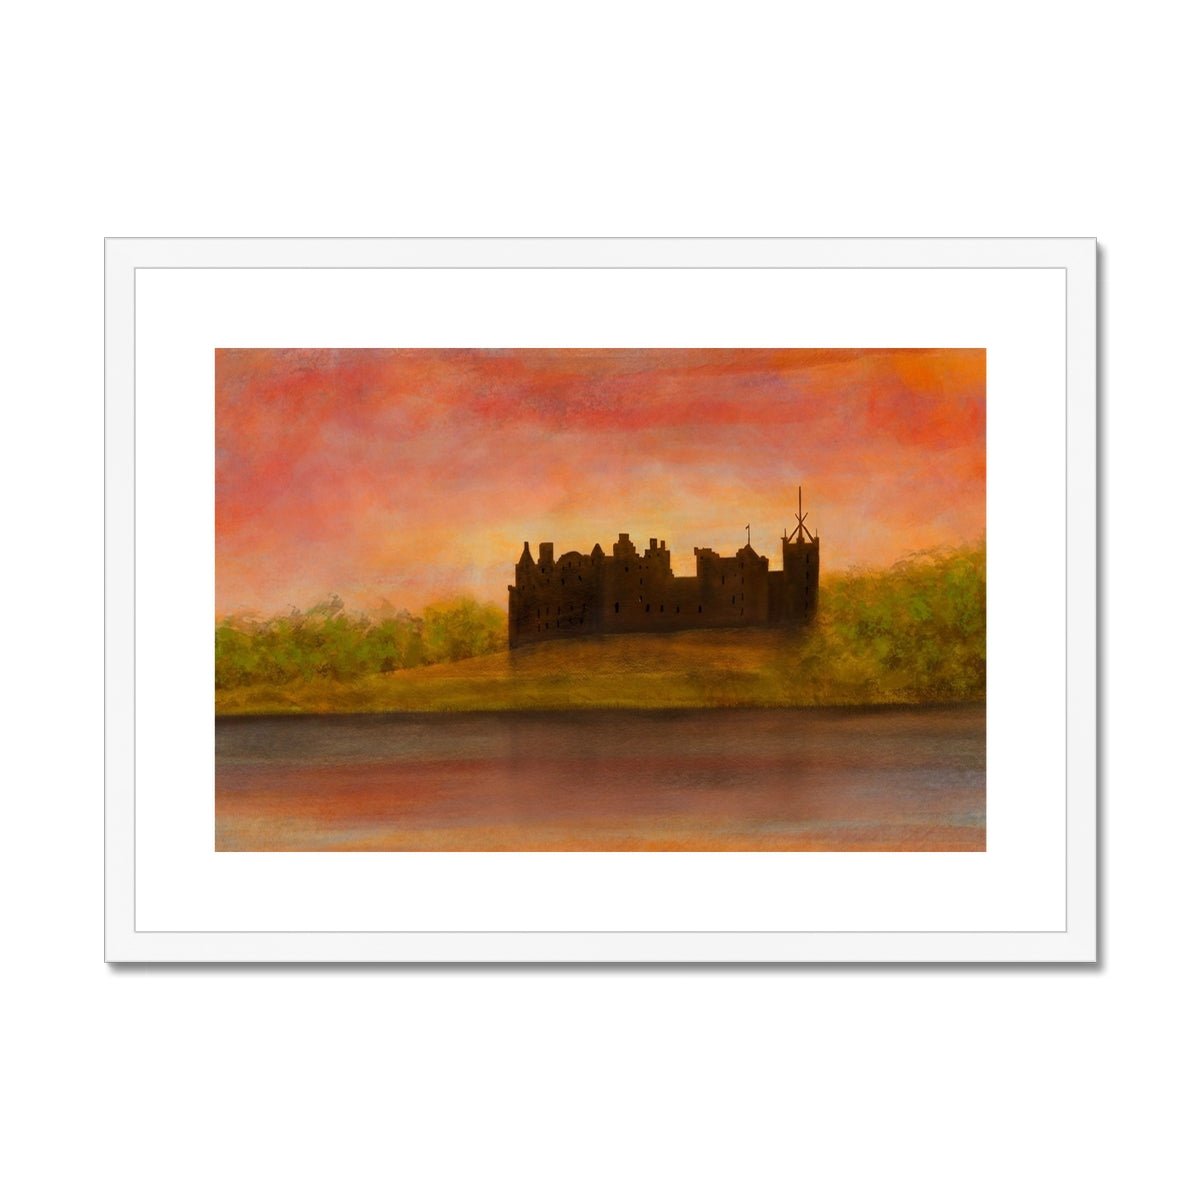 Linlithgow Palace Dusk Painting | Framed & Mounted Prints From Scotland-Framed & Mounted Prints-Historic & Iconic Scotland Art Gallery-A2 Landscape-White Frame-Paintings, Prints, Homeware, Art Gifts From Scotland By Scottish Artist Kevin Hunter